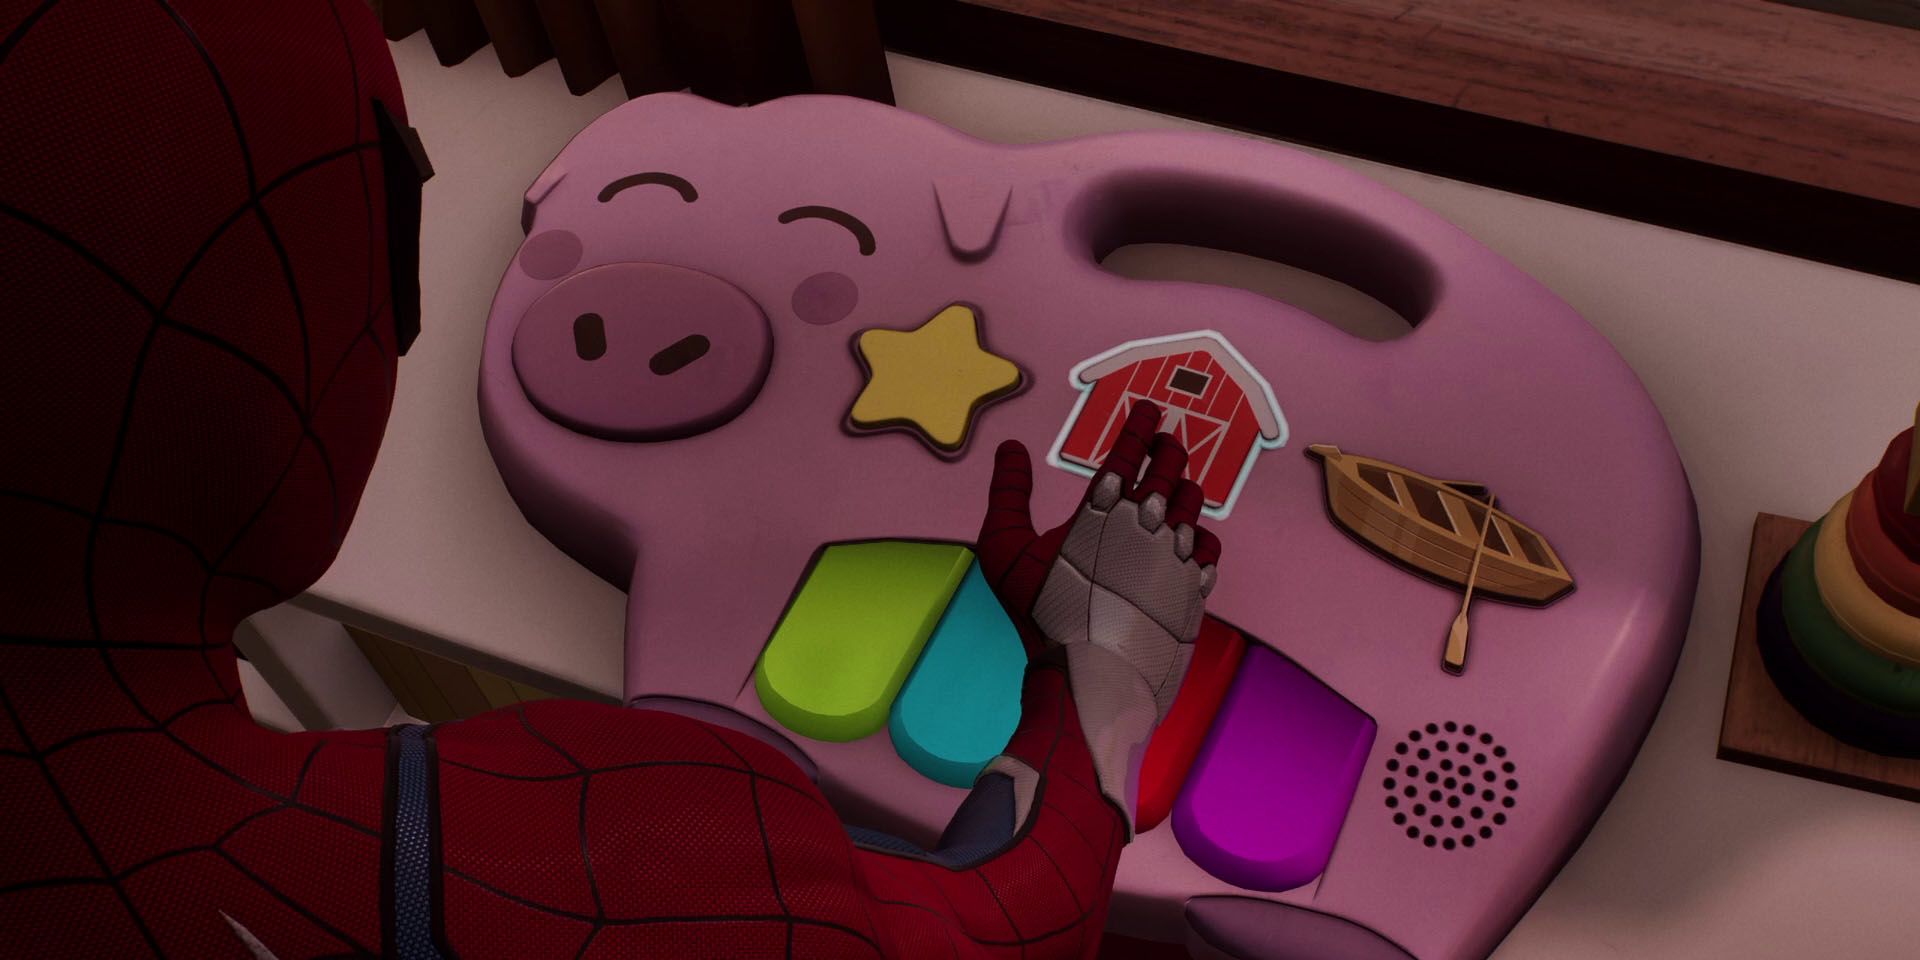 spider-man-2-piano-puzzle-toy